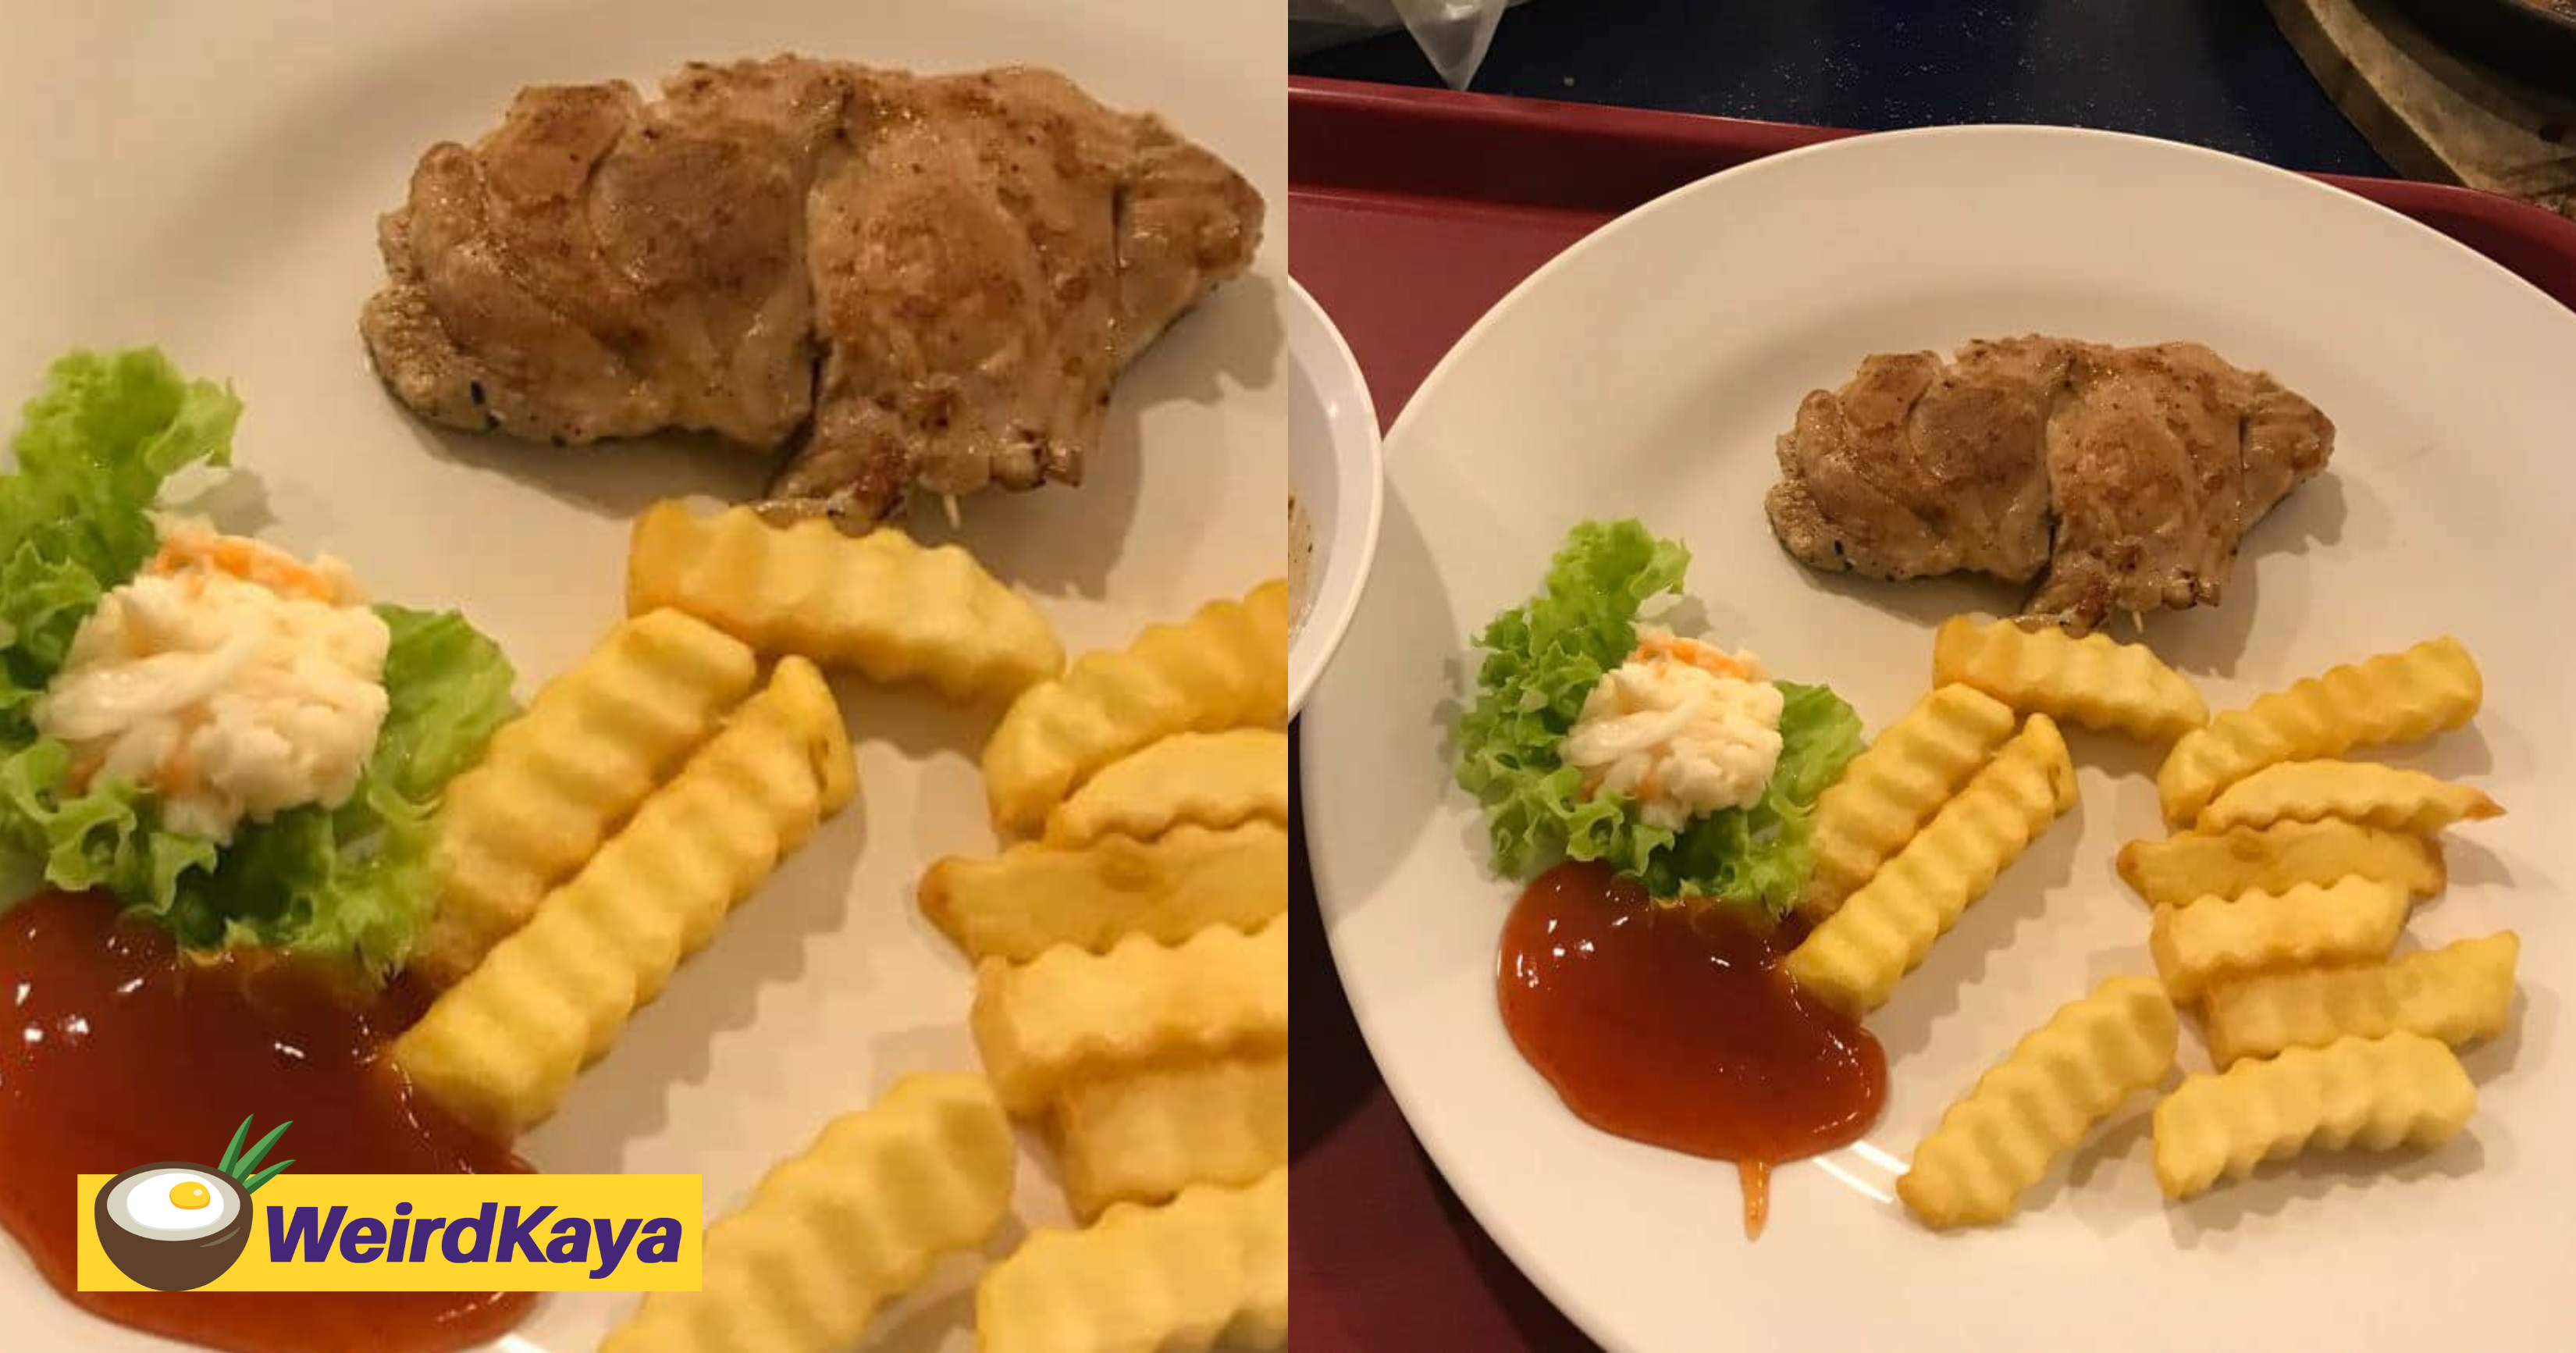 M'sian Shocked By Size Of RM13 Chicken Chop Which Was Smaller Than His Hand